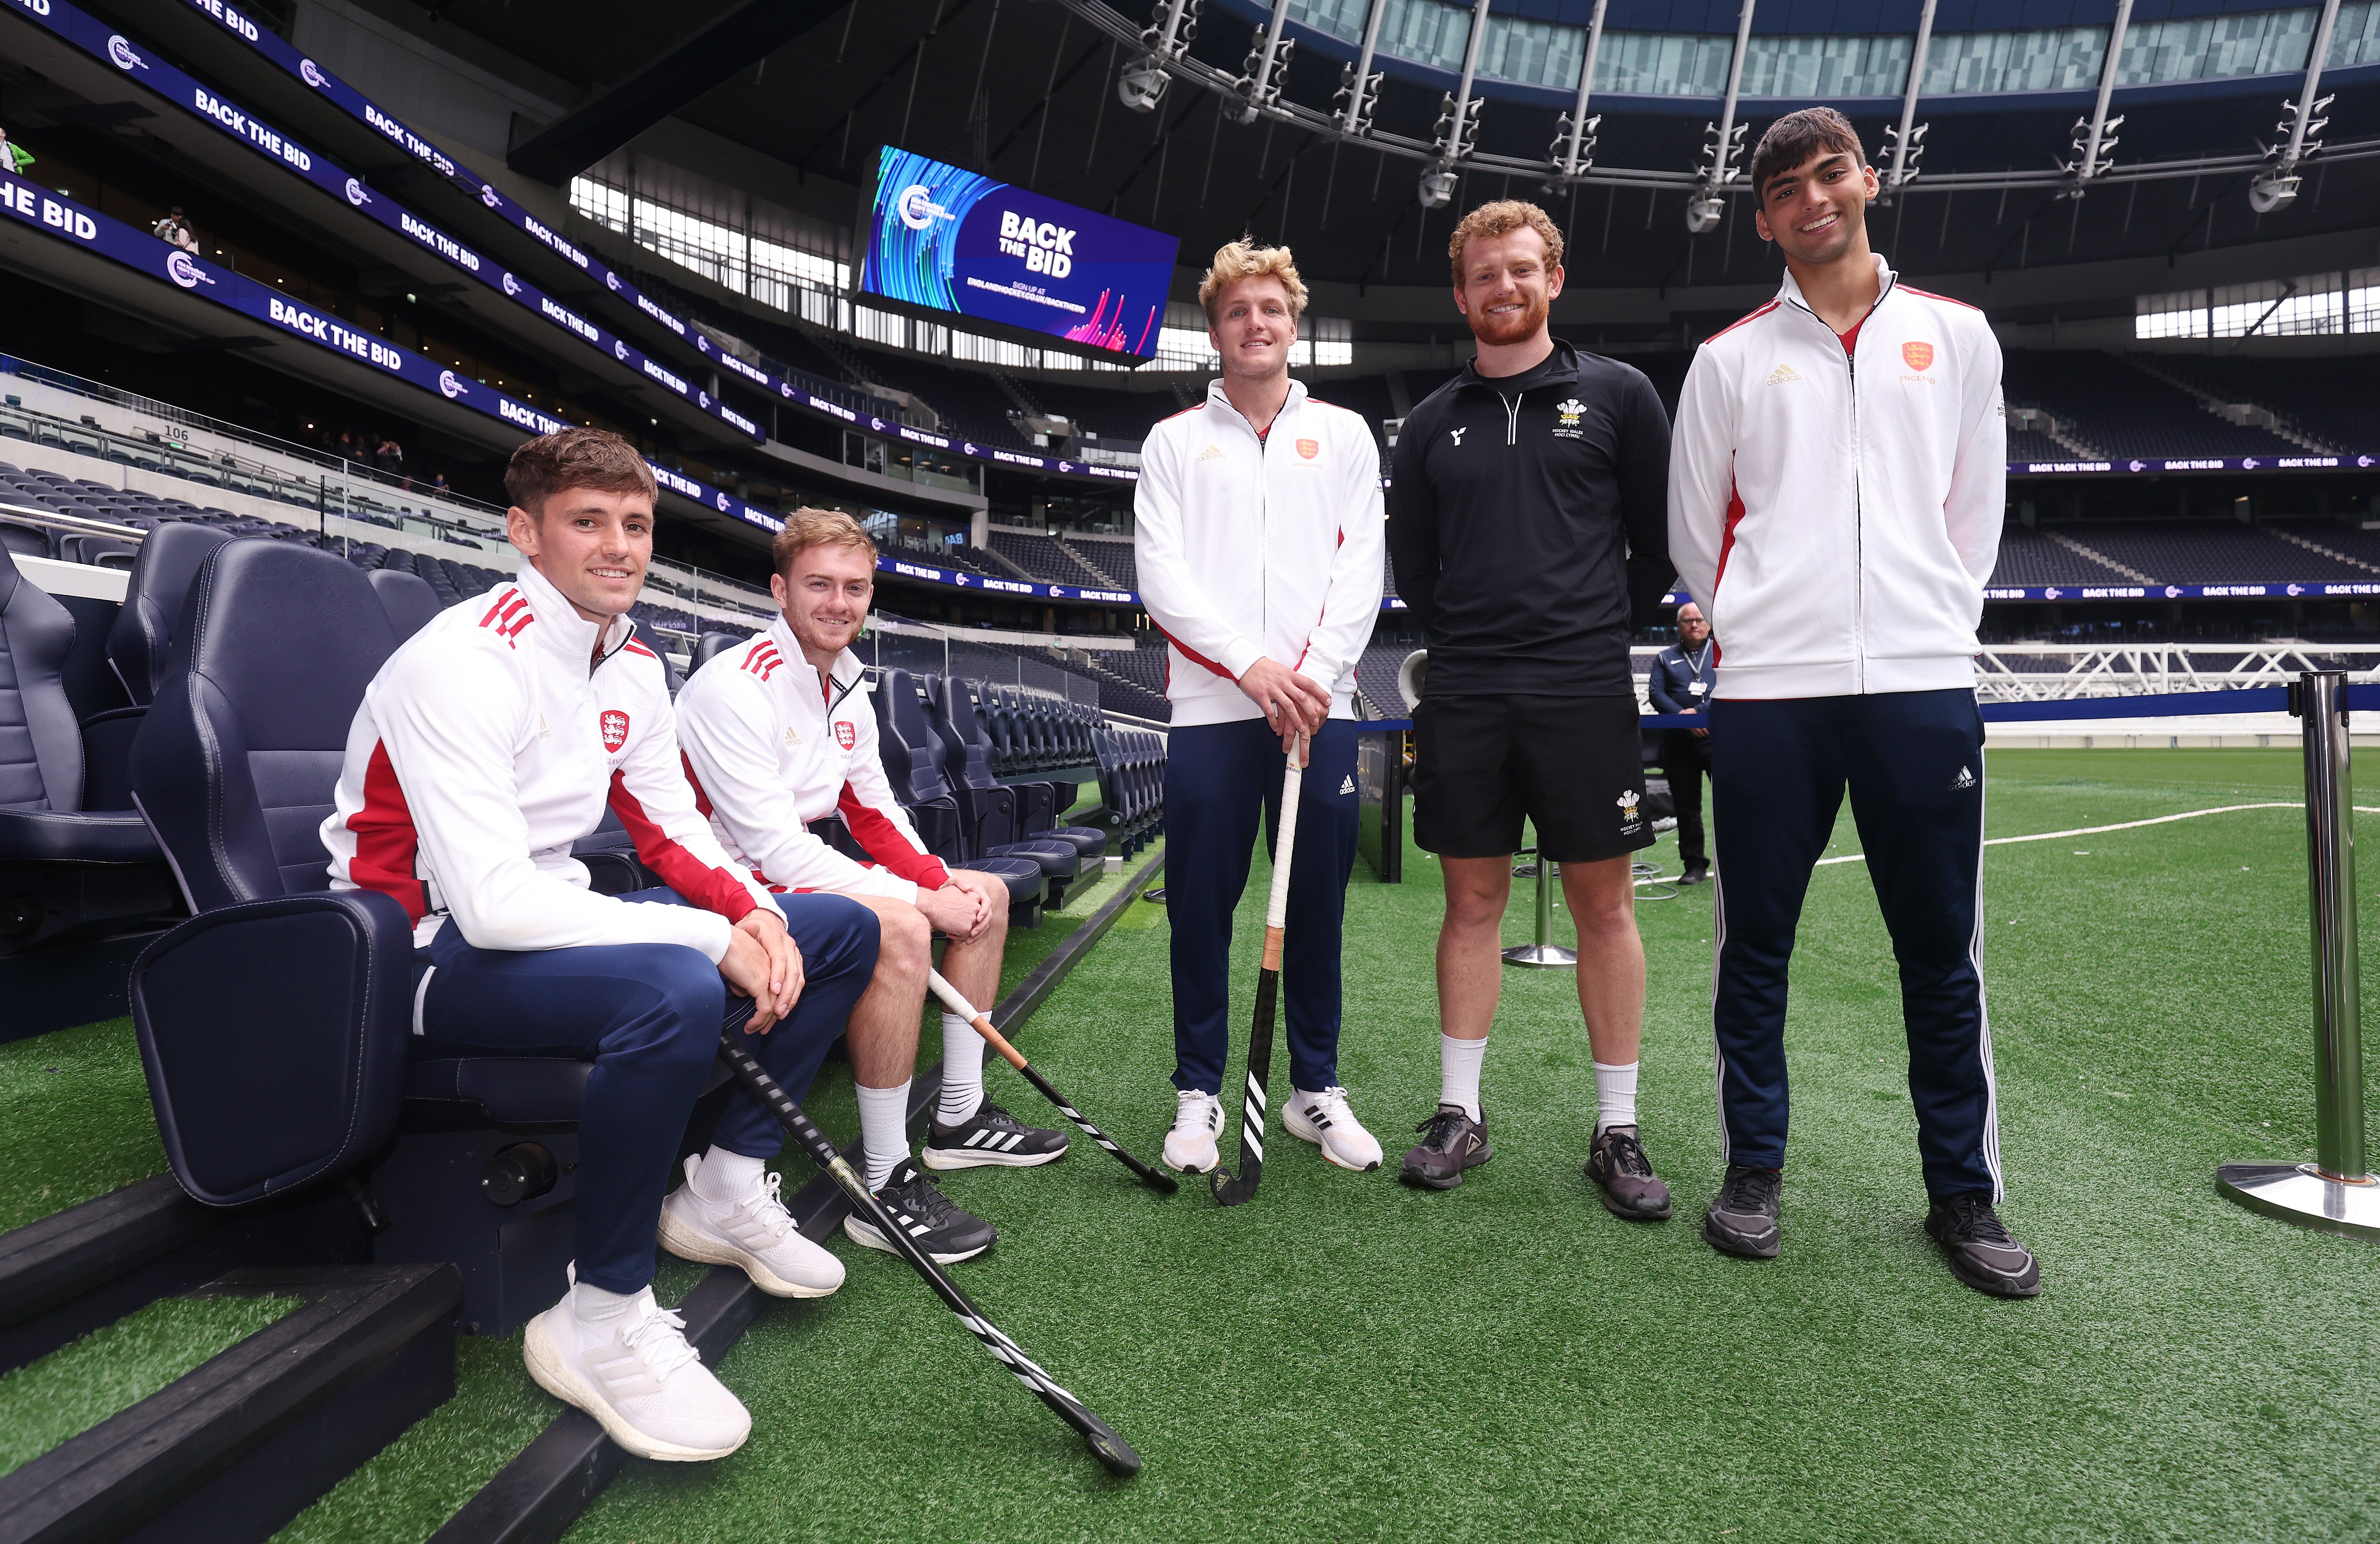 Tottenham Hotspur Stadium could host the 2026 World Cup final (Alex Morton/Getty Images for England Hockey)